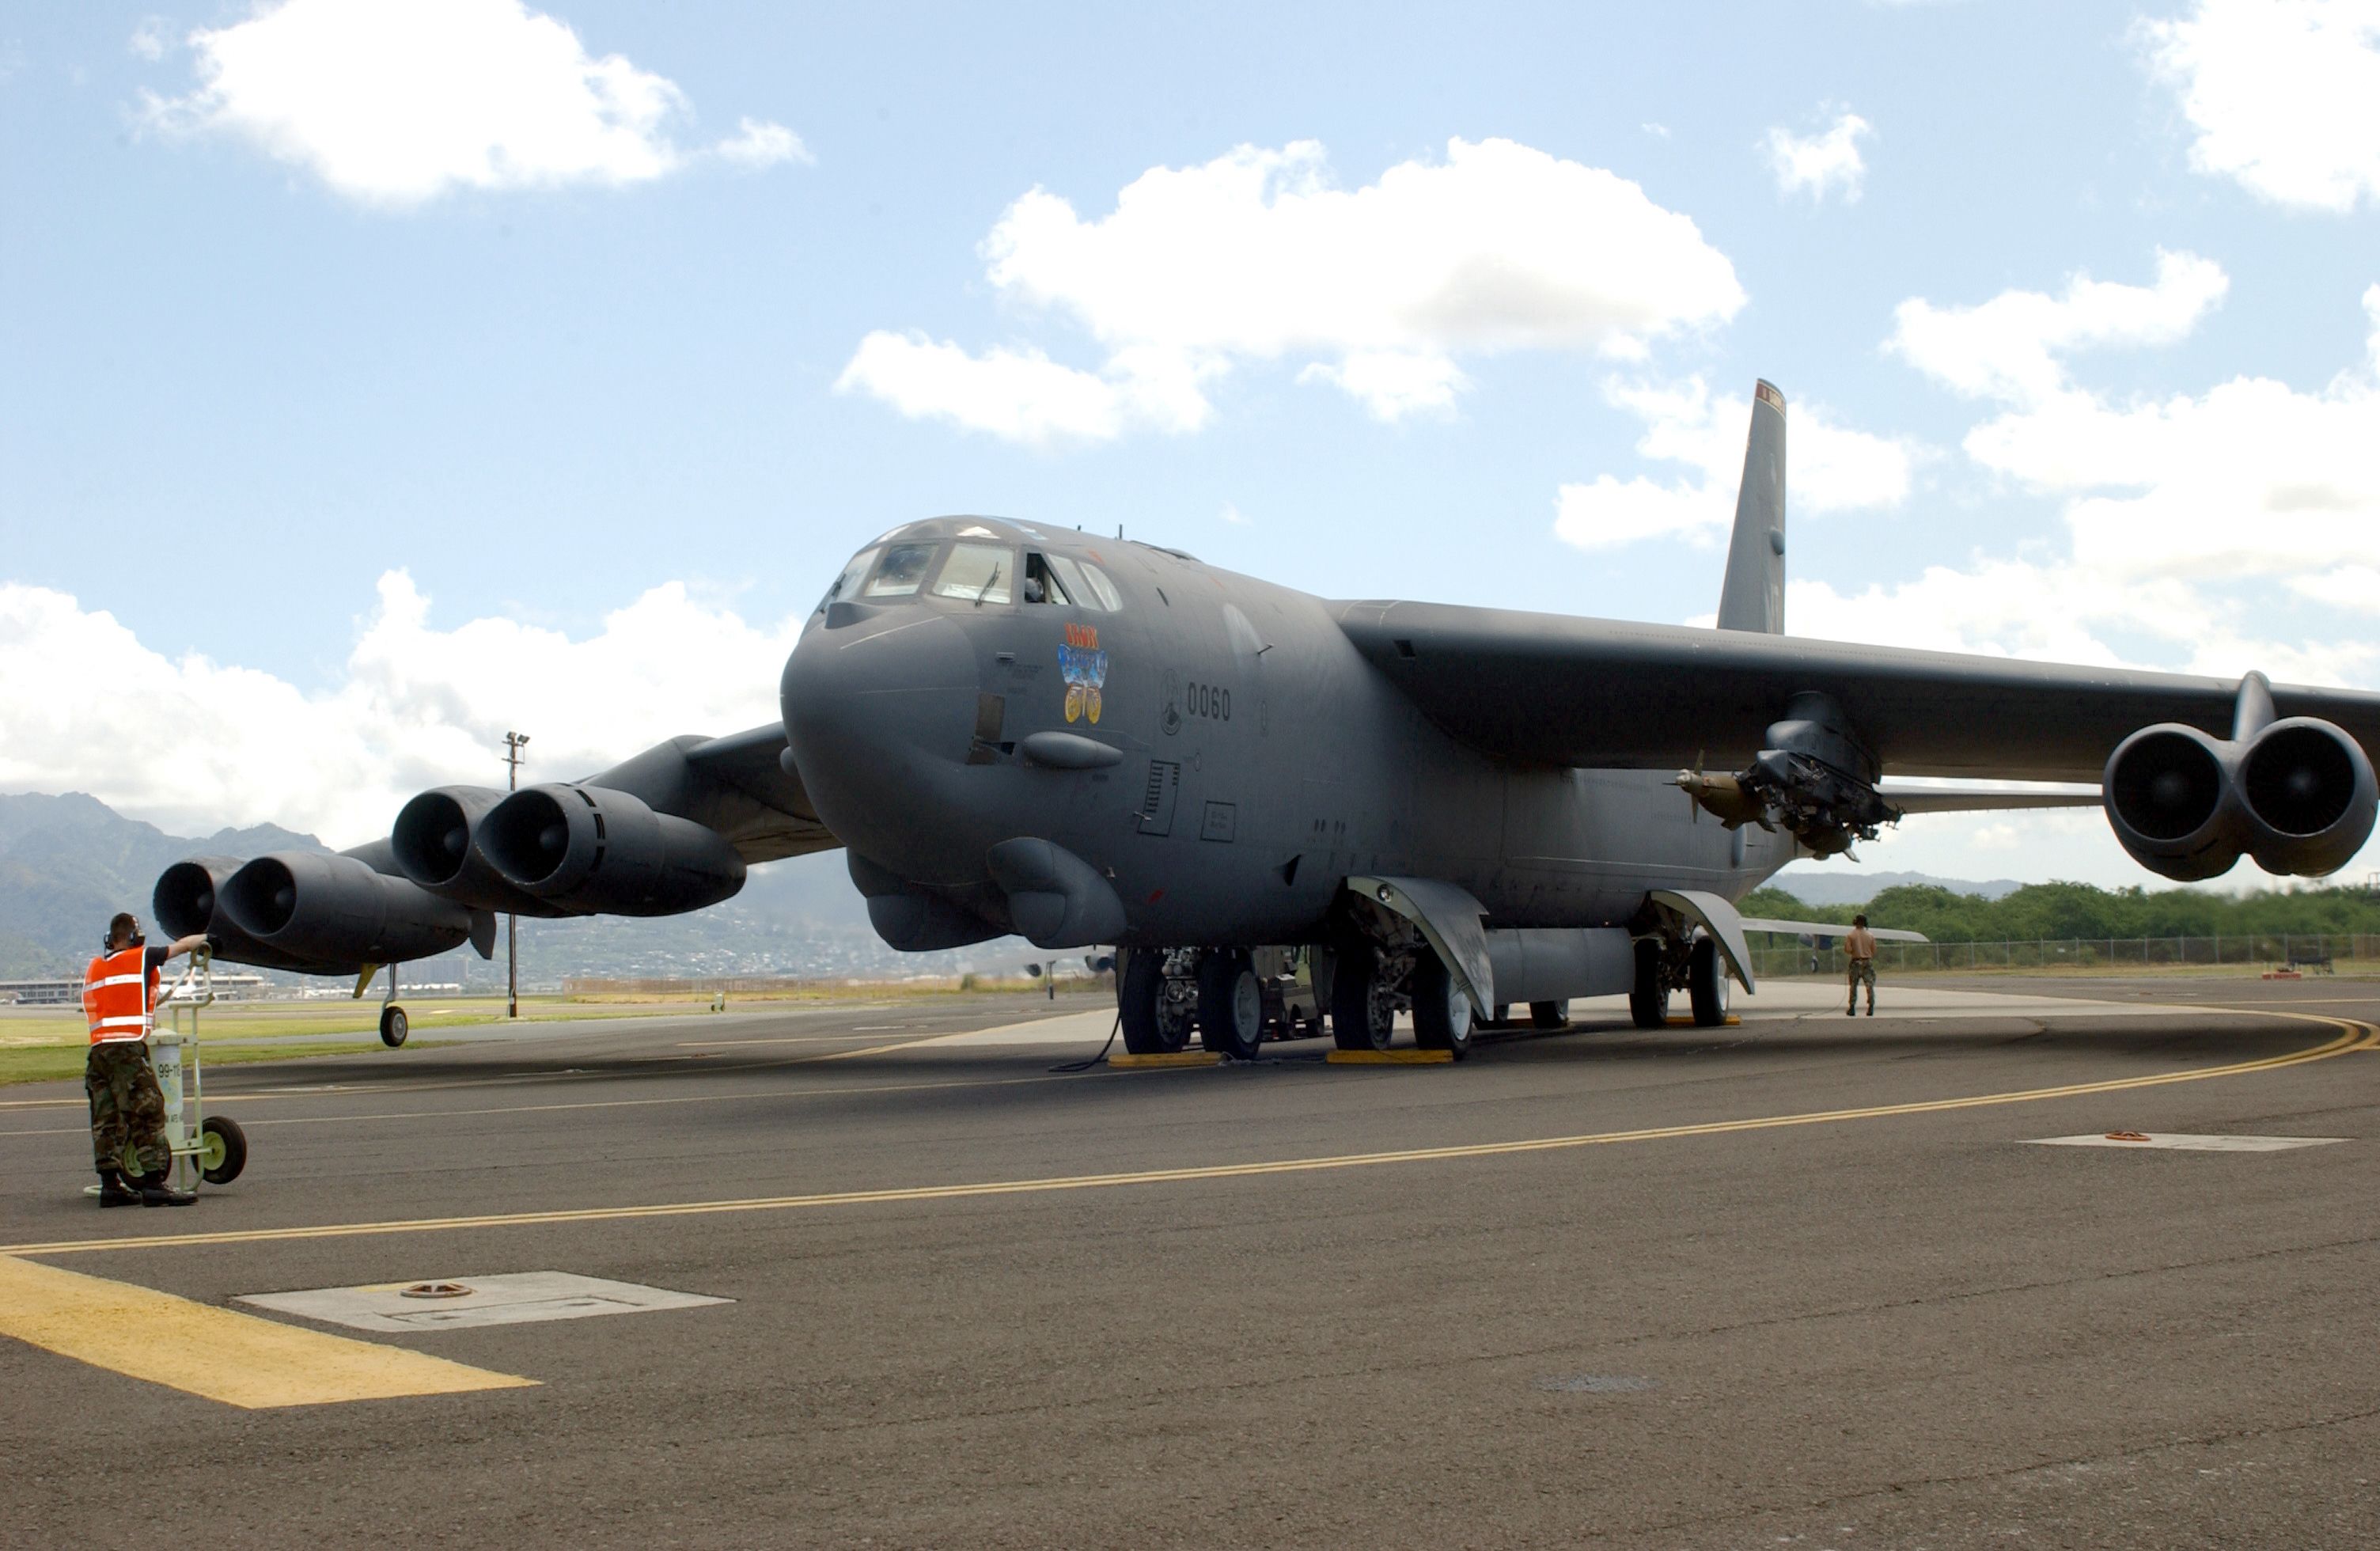 A parked and chocked Boeing B-52H Stratofortress